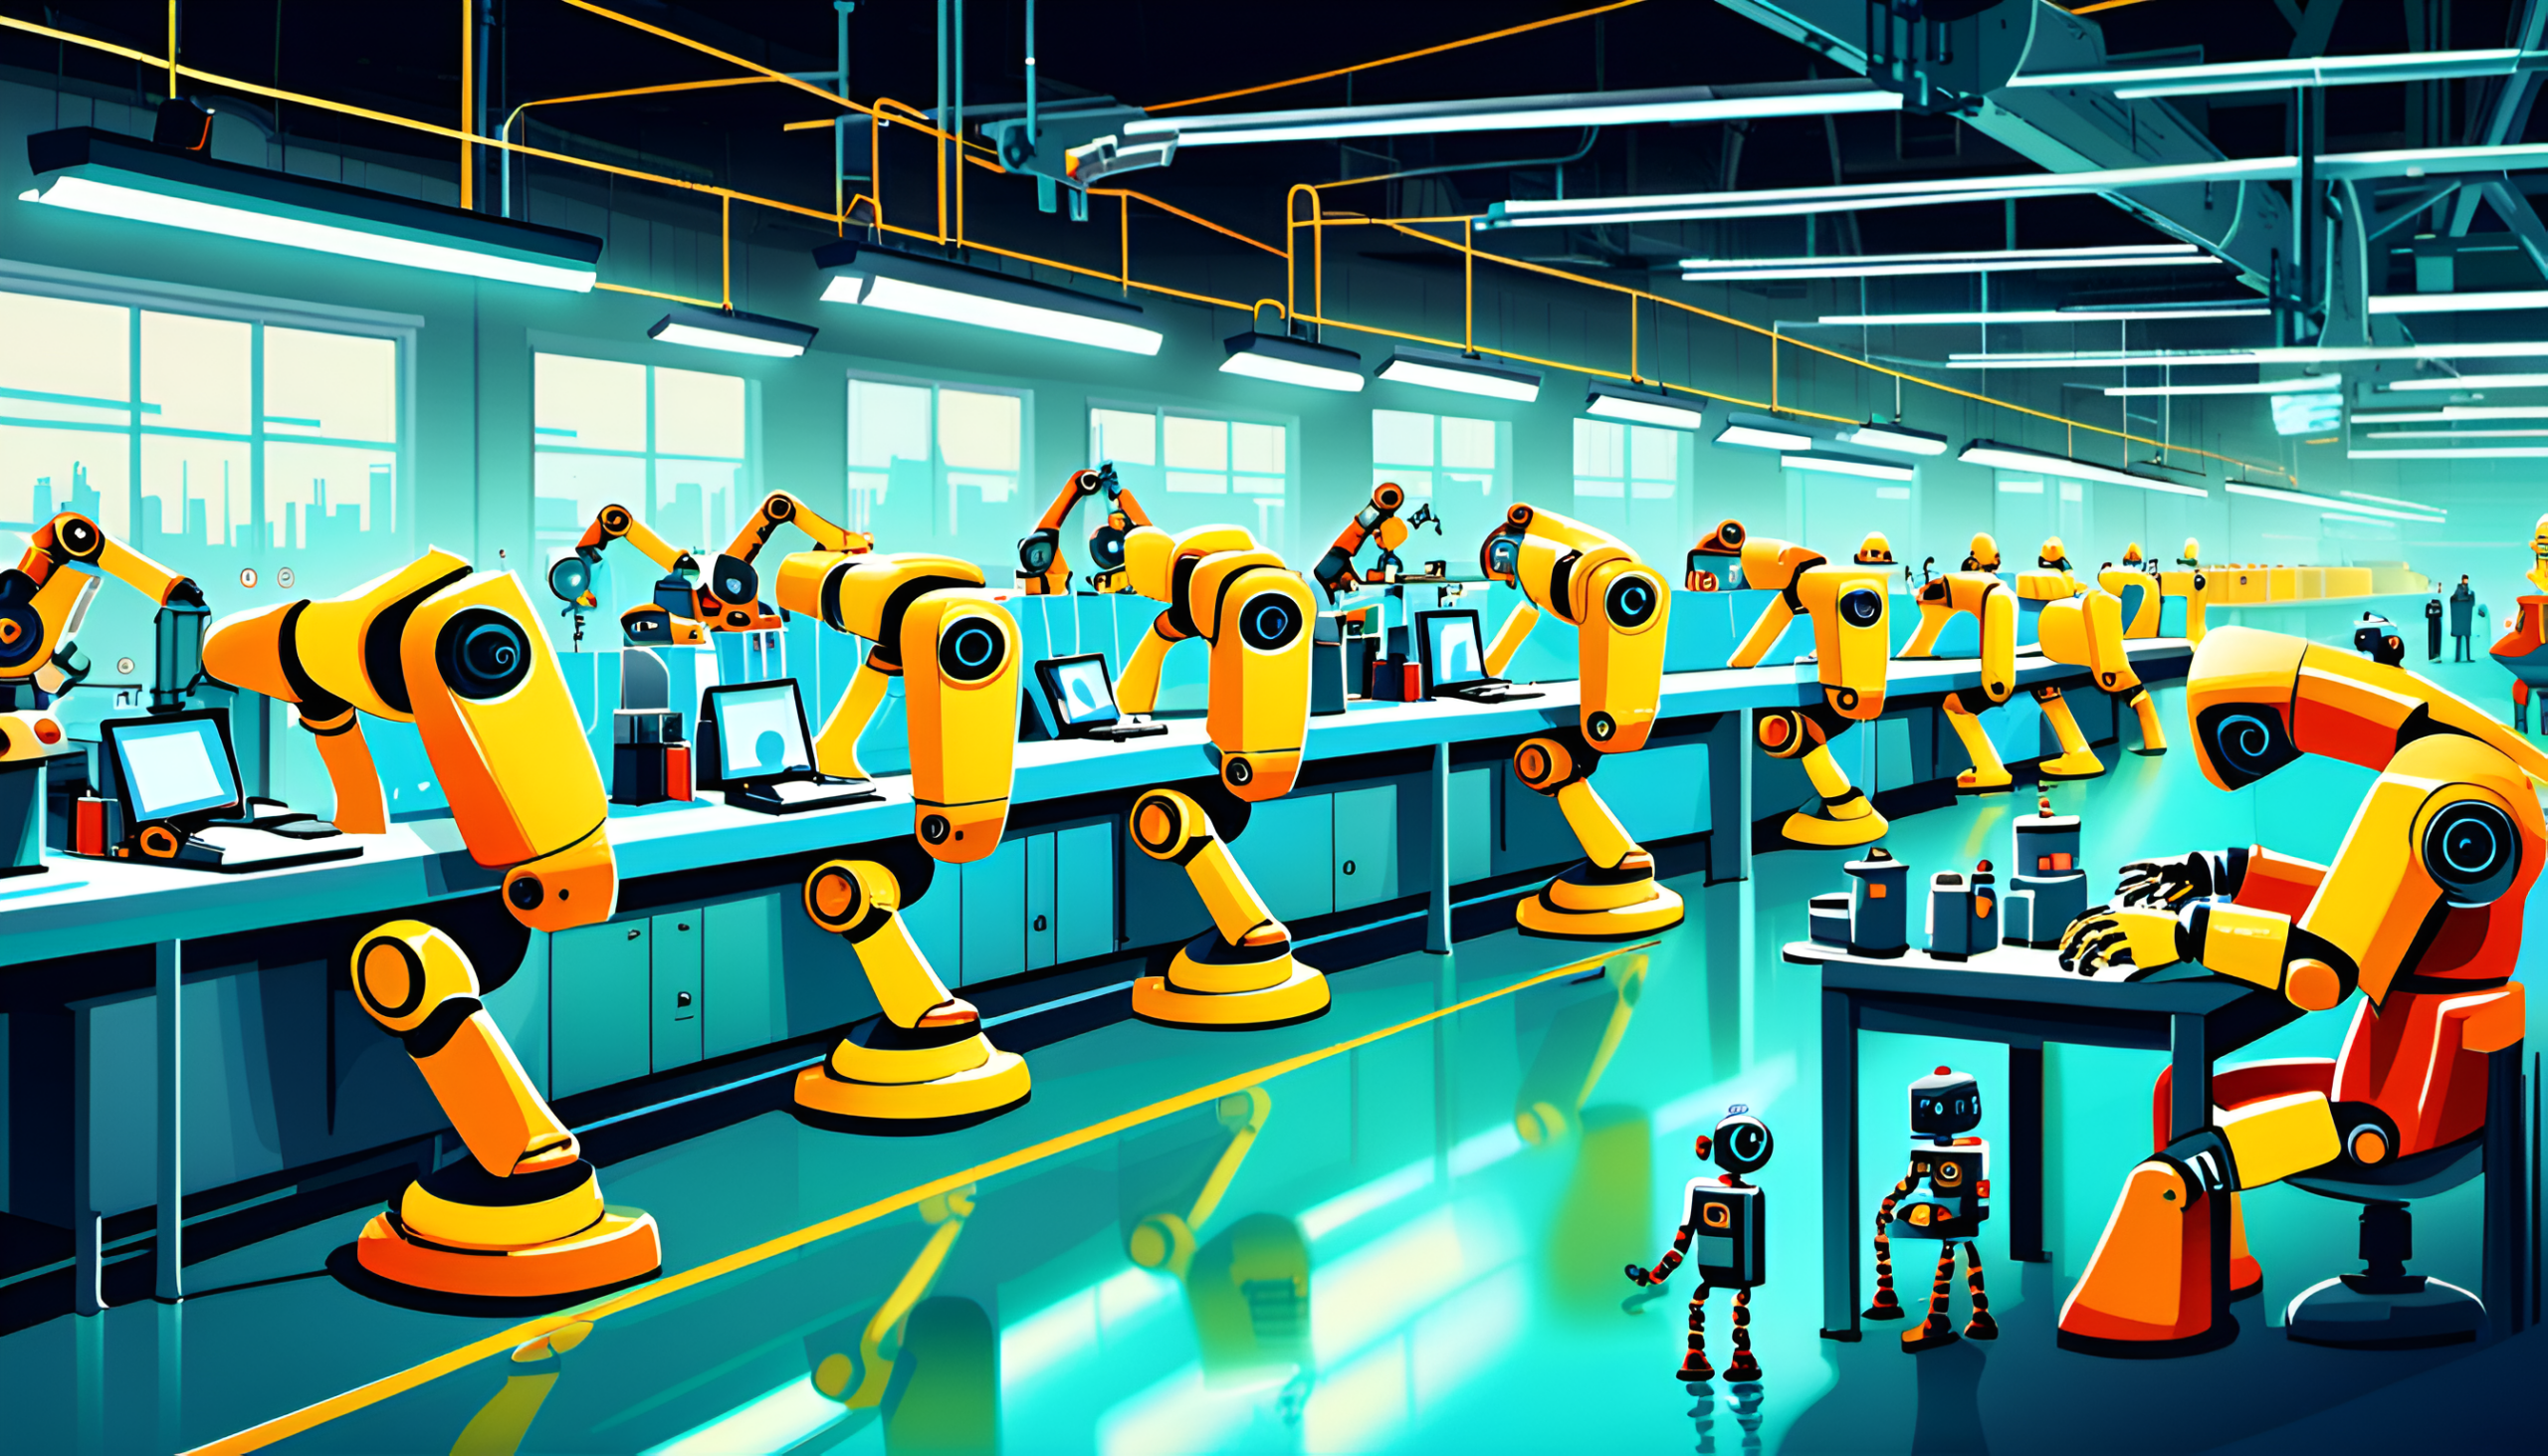 AI Robots work in factory devoid of any humans - dreamt up by me and created by Dreamstudio.ai